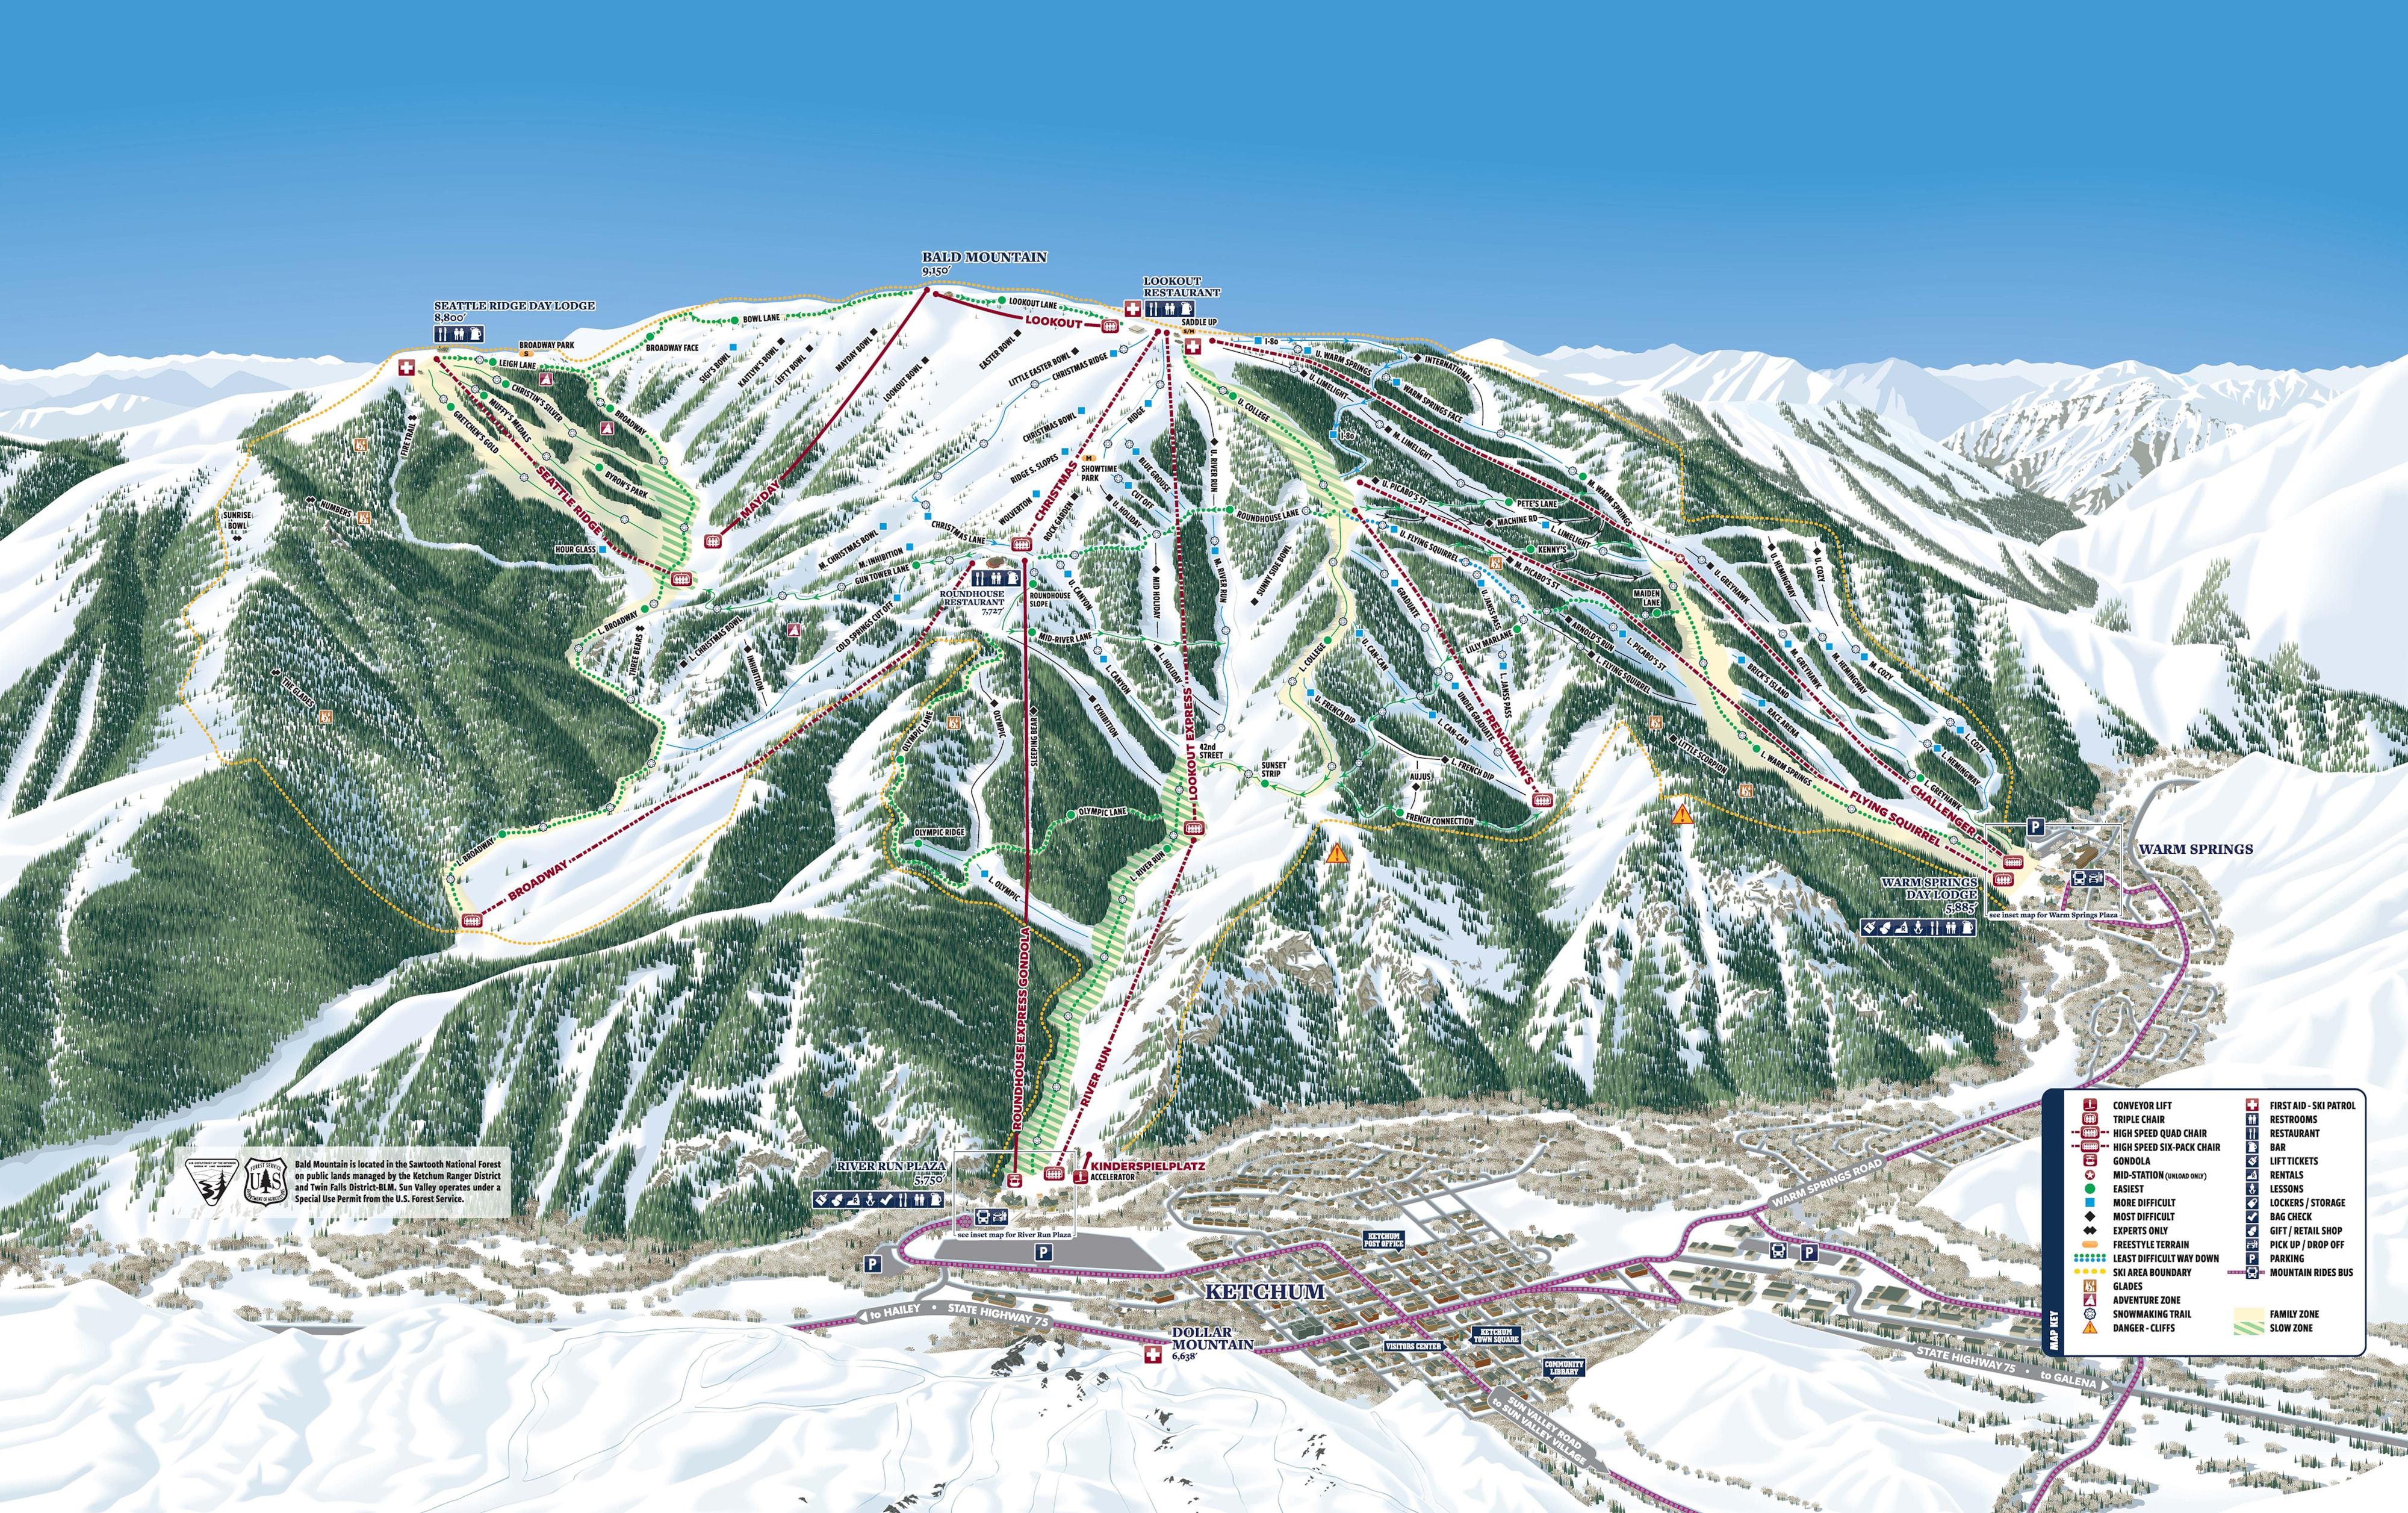 Navigate The Mountain with Our Maps & Guides